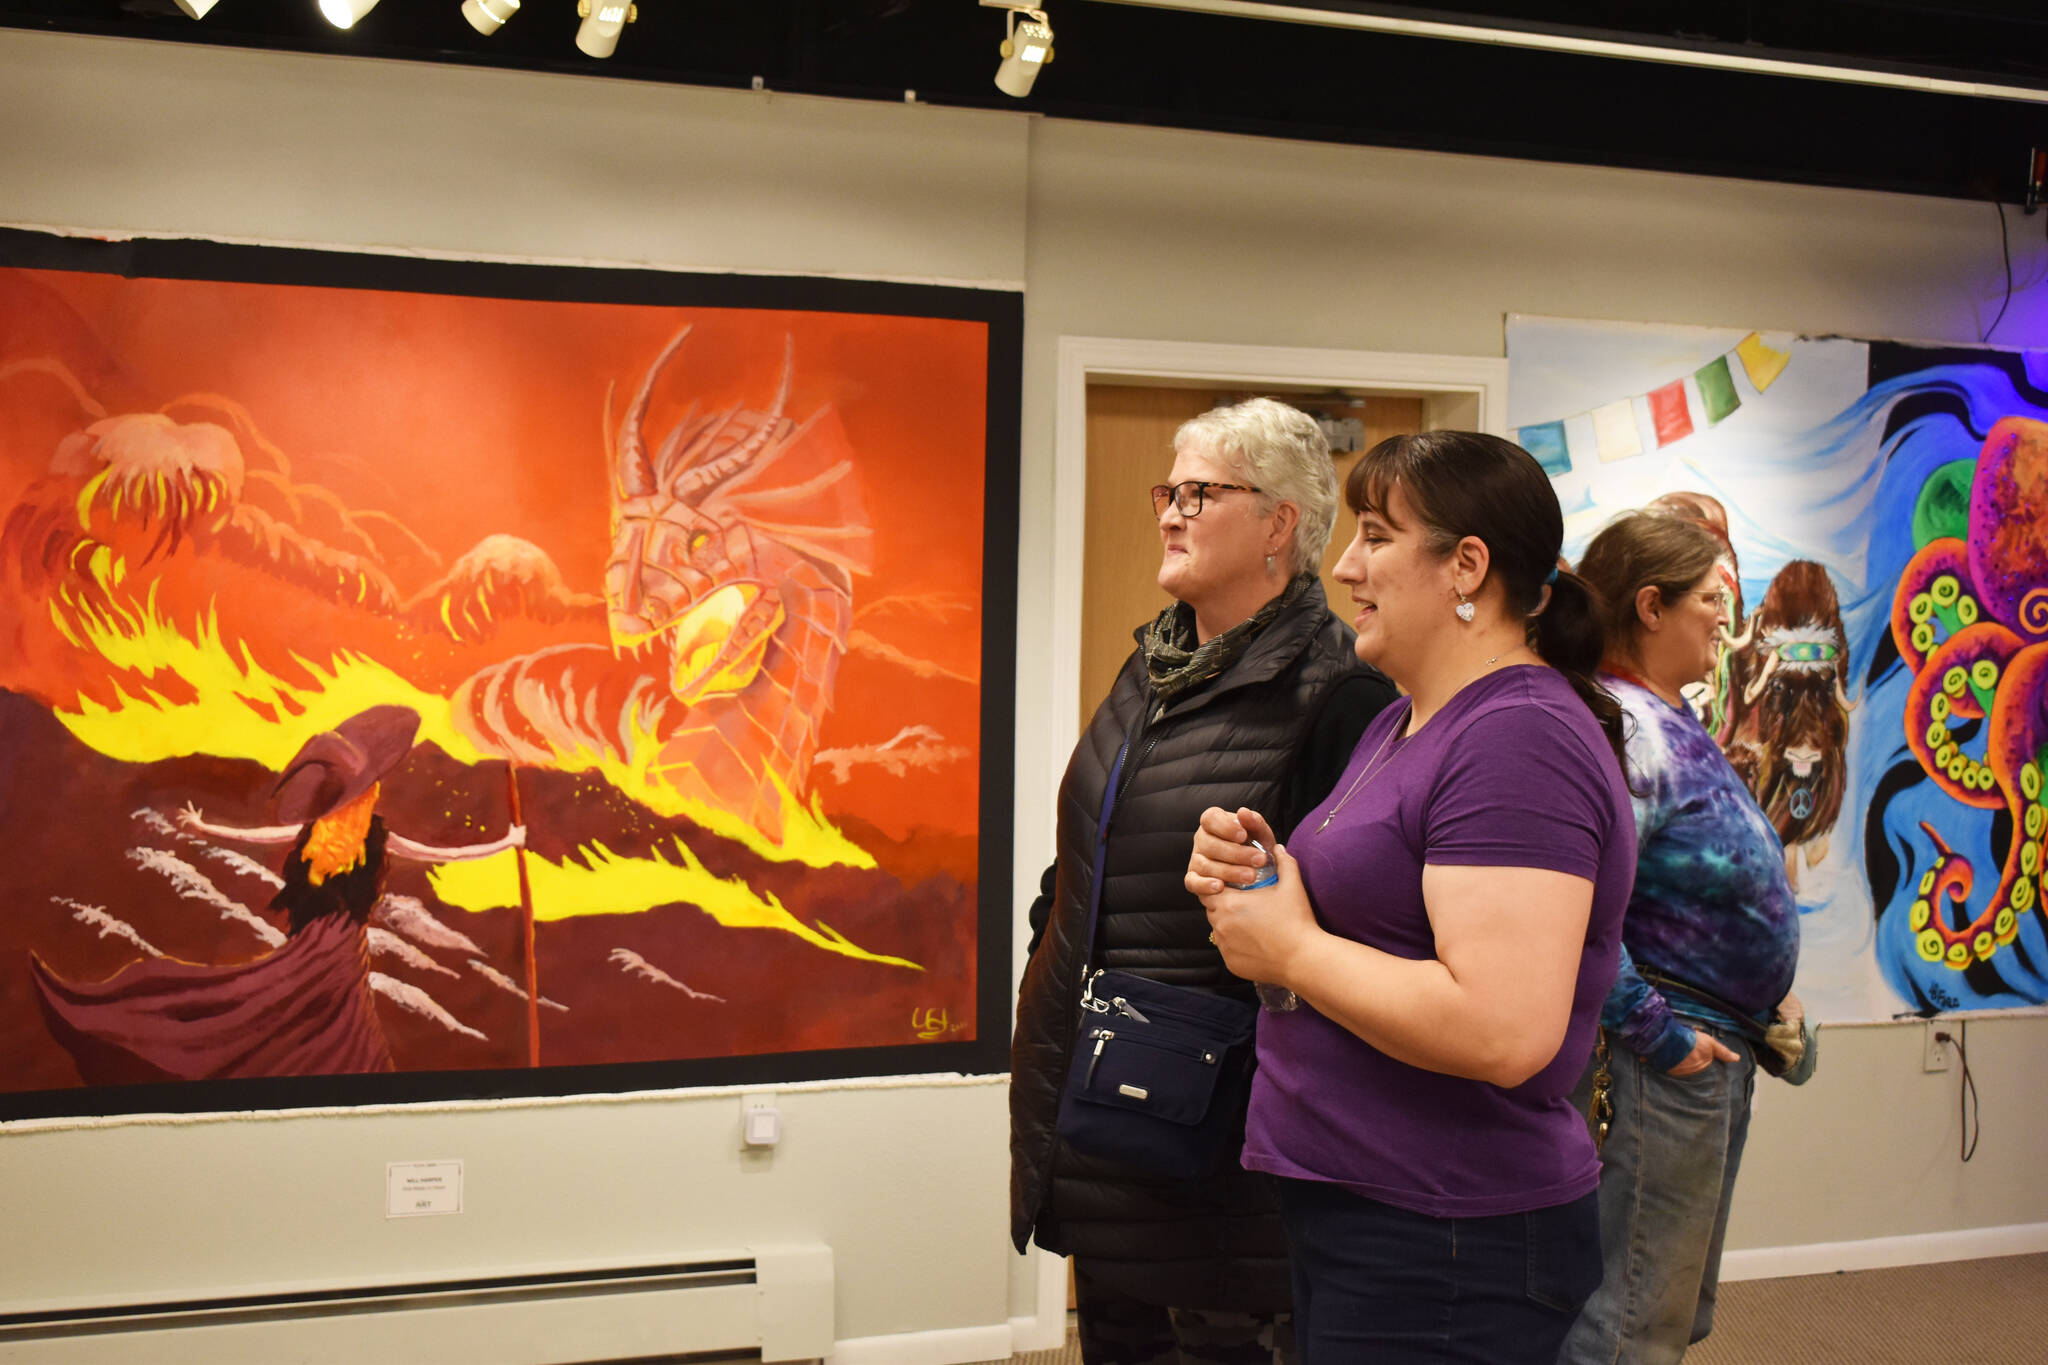 Theresa Ritter, an artist with a piece in the exhibition, speaks to an attendee of the Mural 2022 opening reception at Kenai Art Center in Kenai, Alaska, on Thursday, Nov. 10, 2022. (Jake Dye/Peninsula Clarion)